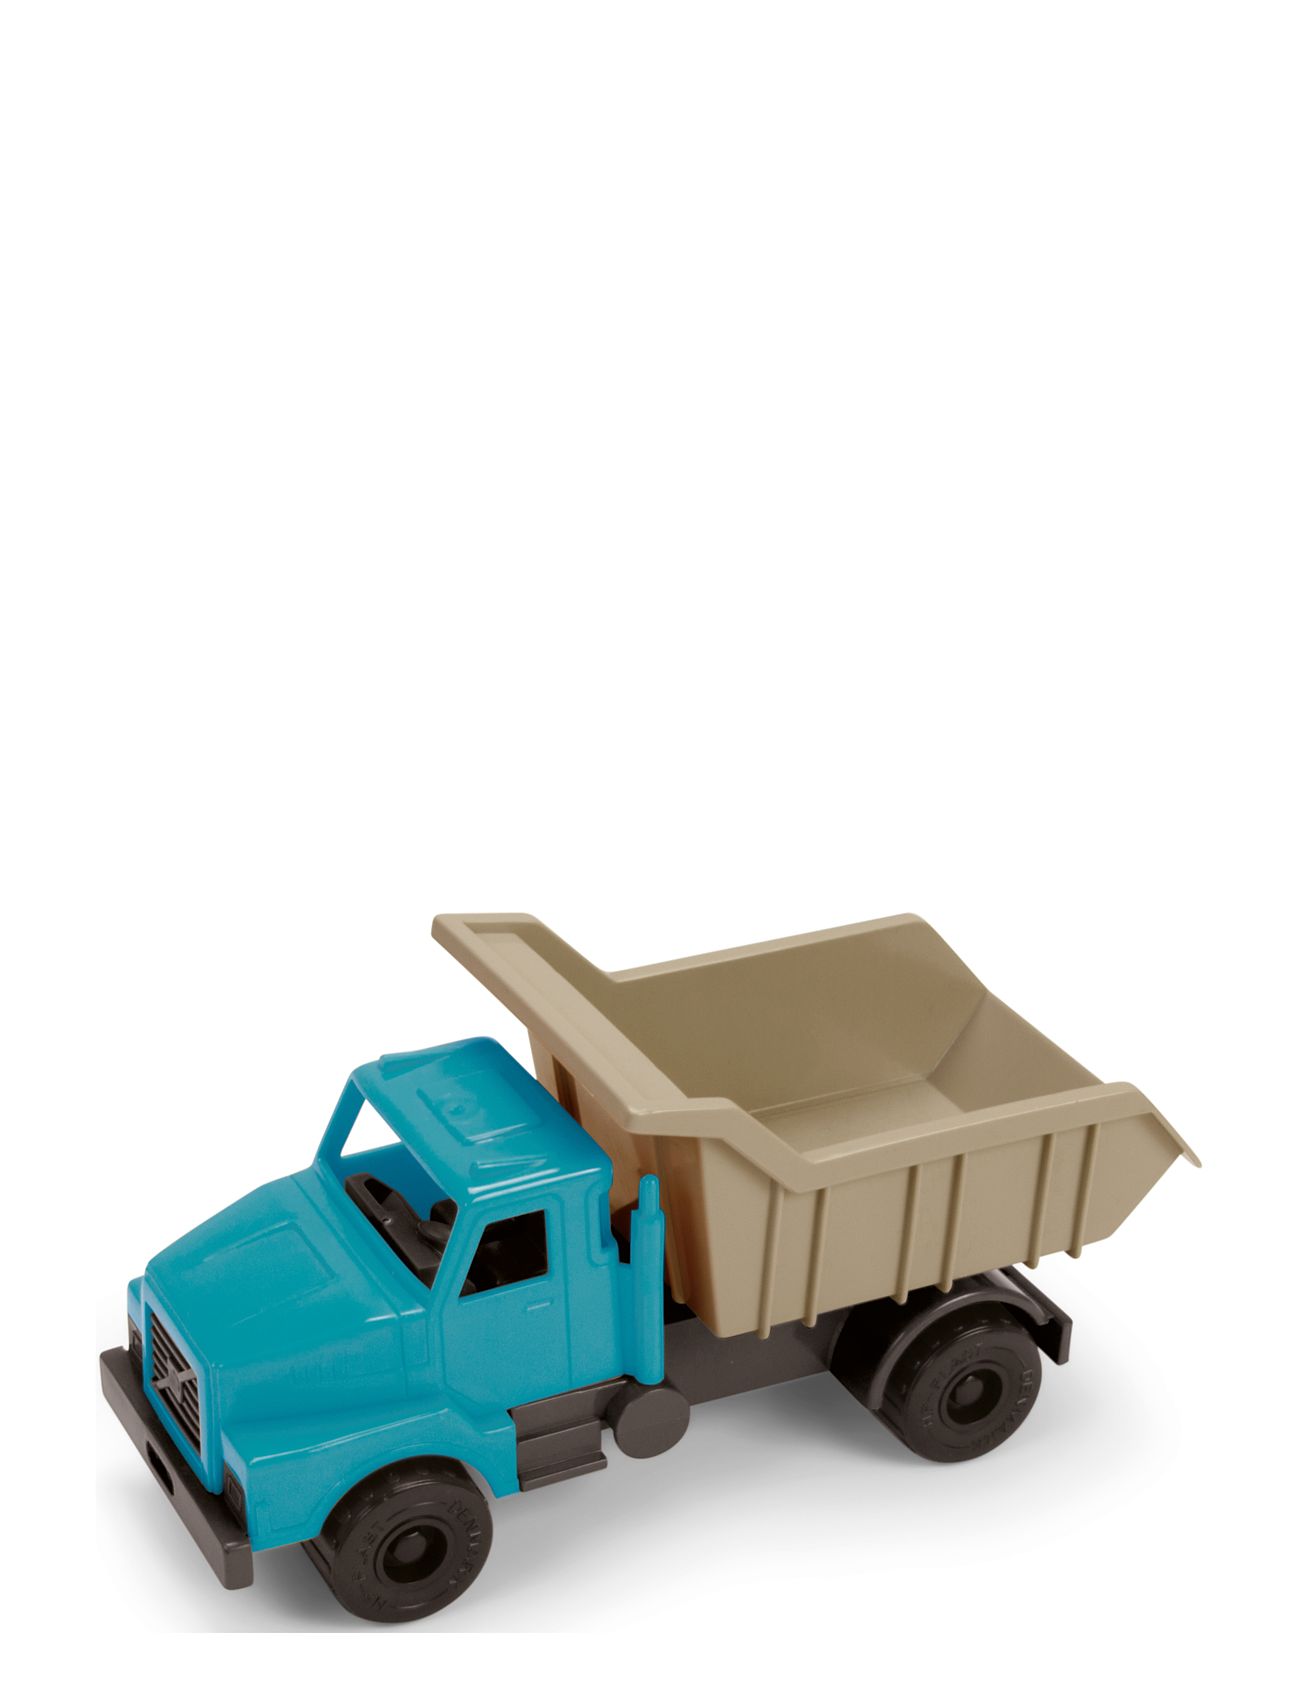 Bmt Dump Truck Toys Toy Cars & Vehicles Toy Cars Garbage Trucks Multi/patterned Dantoy